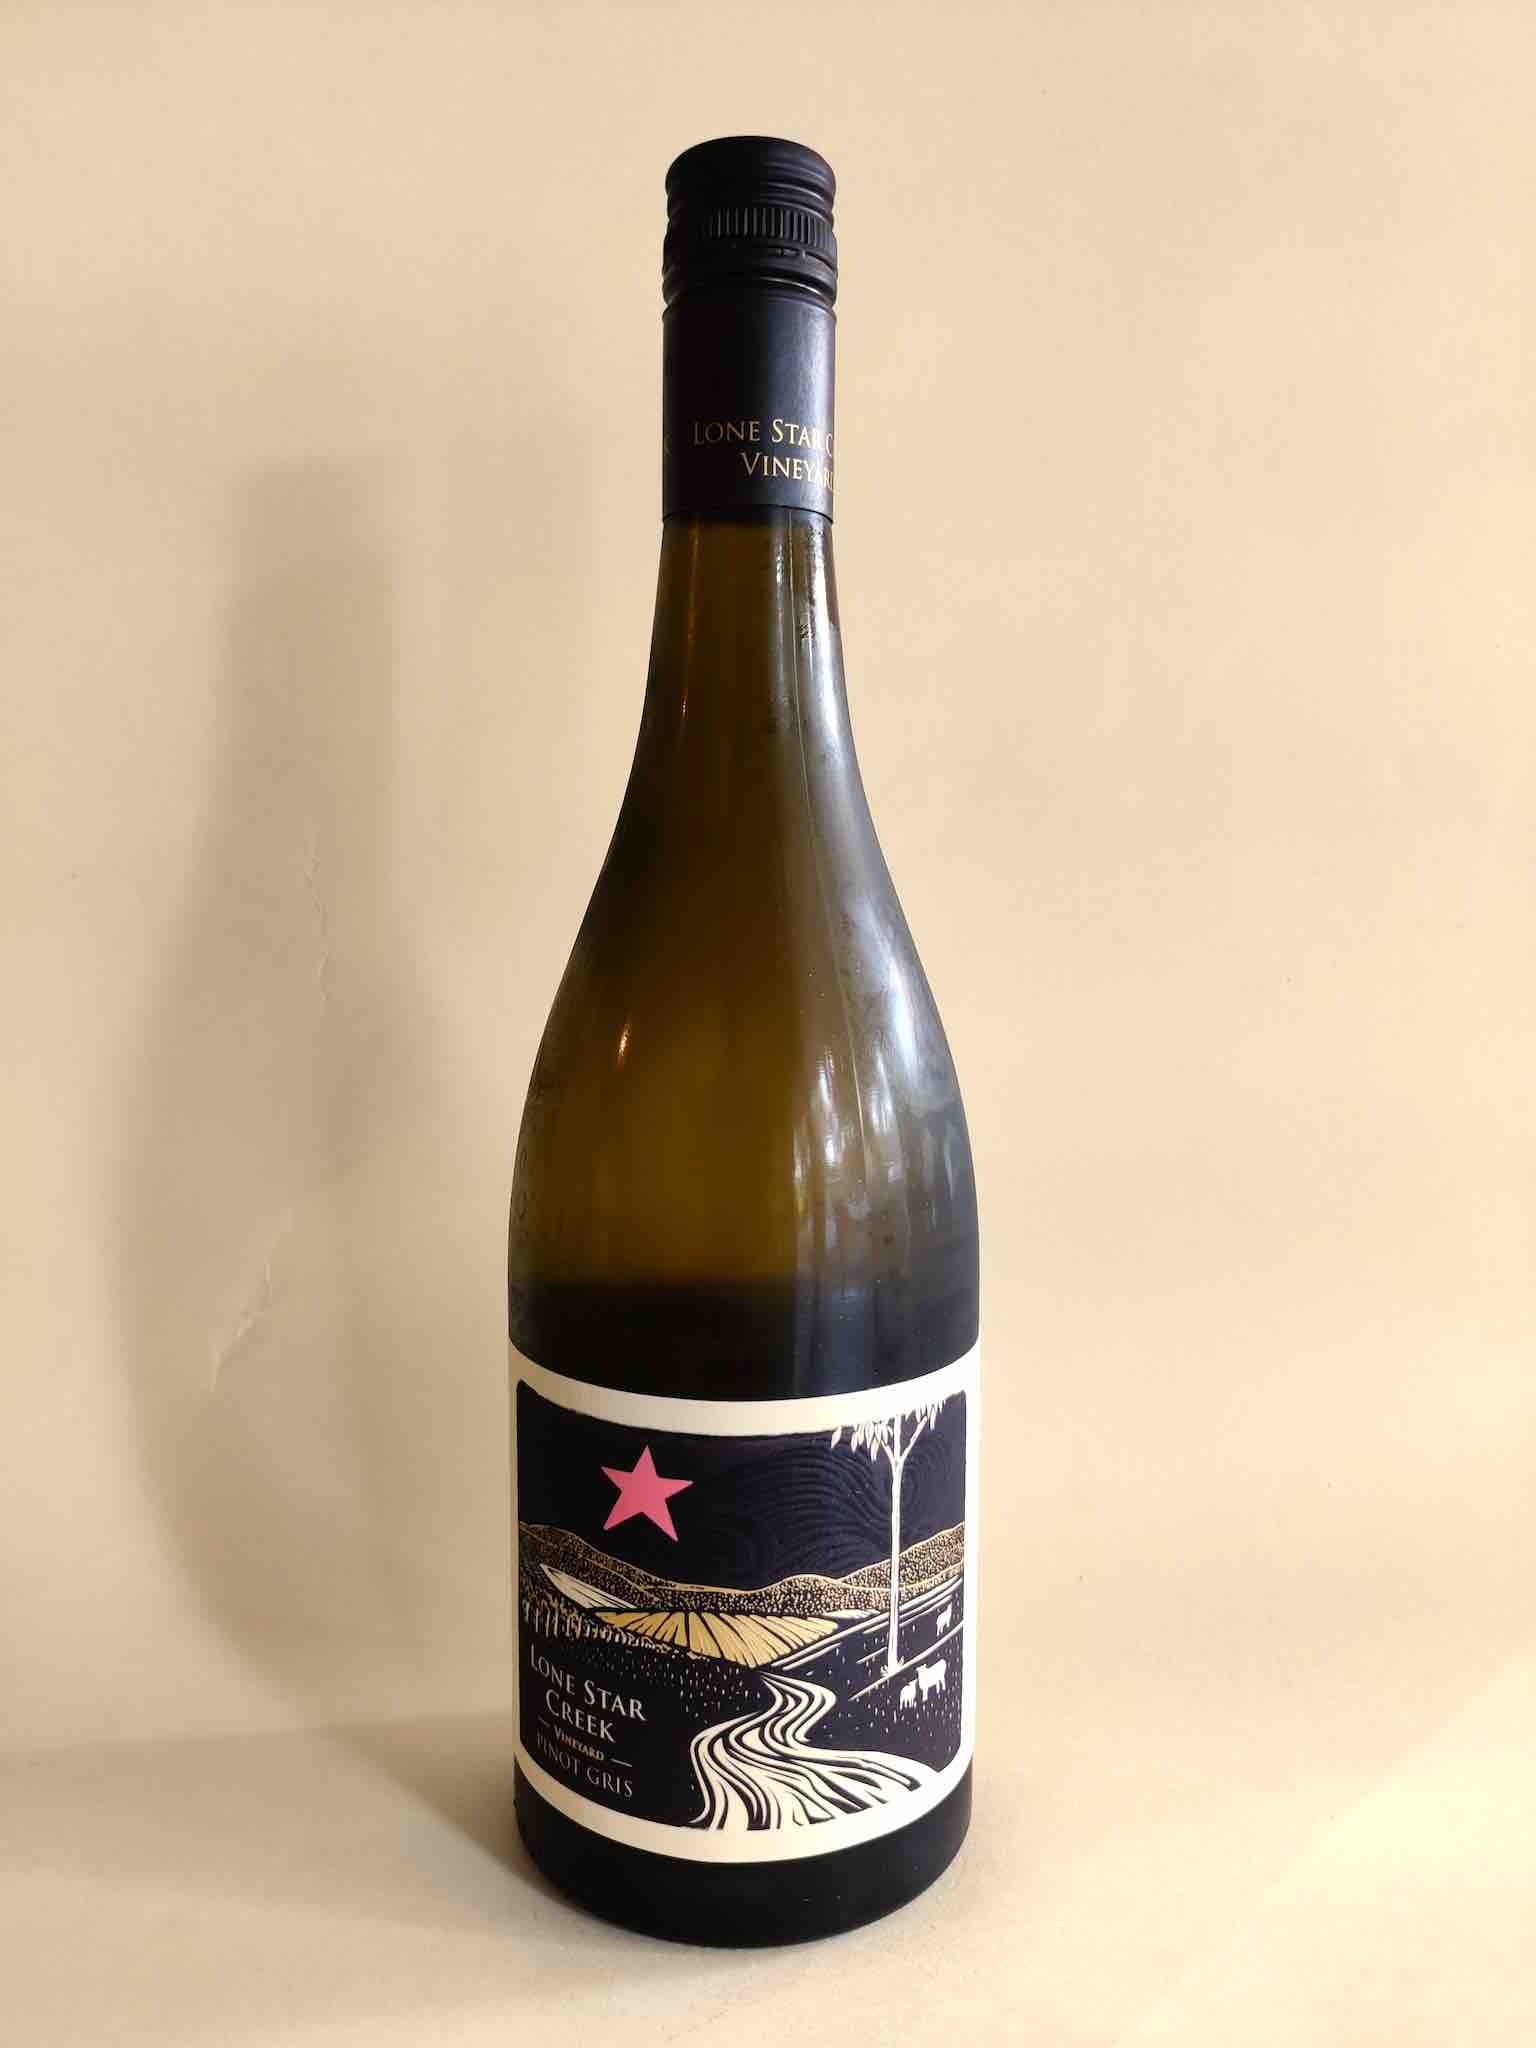 A bottle of Lone Star Creek Pinot Gris from the Yarra Valley, Victoria. 